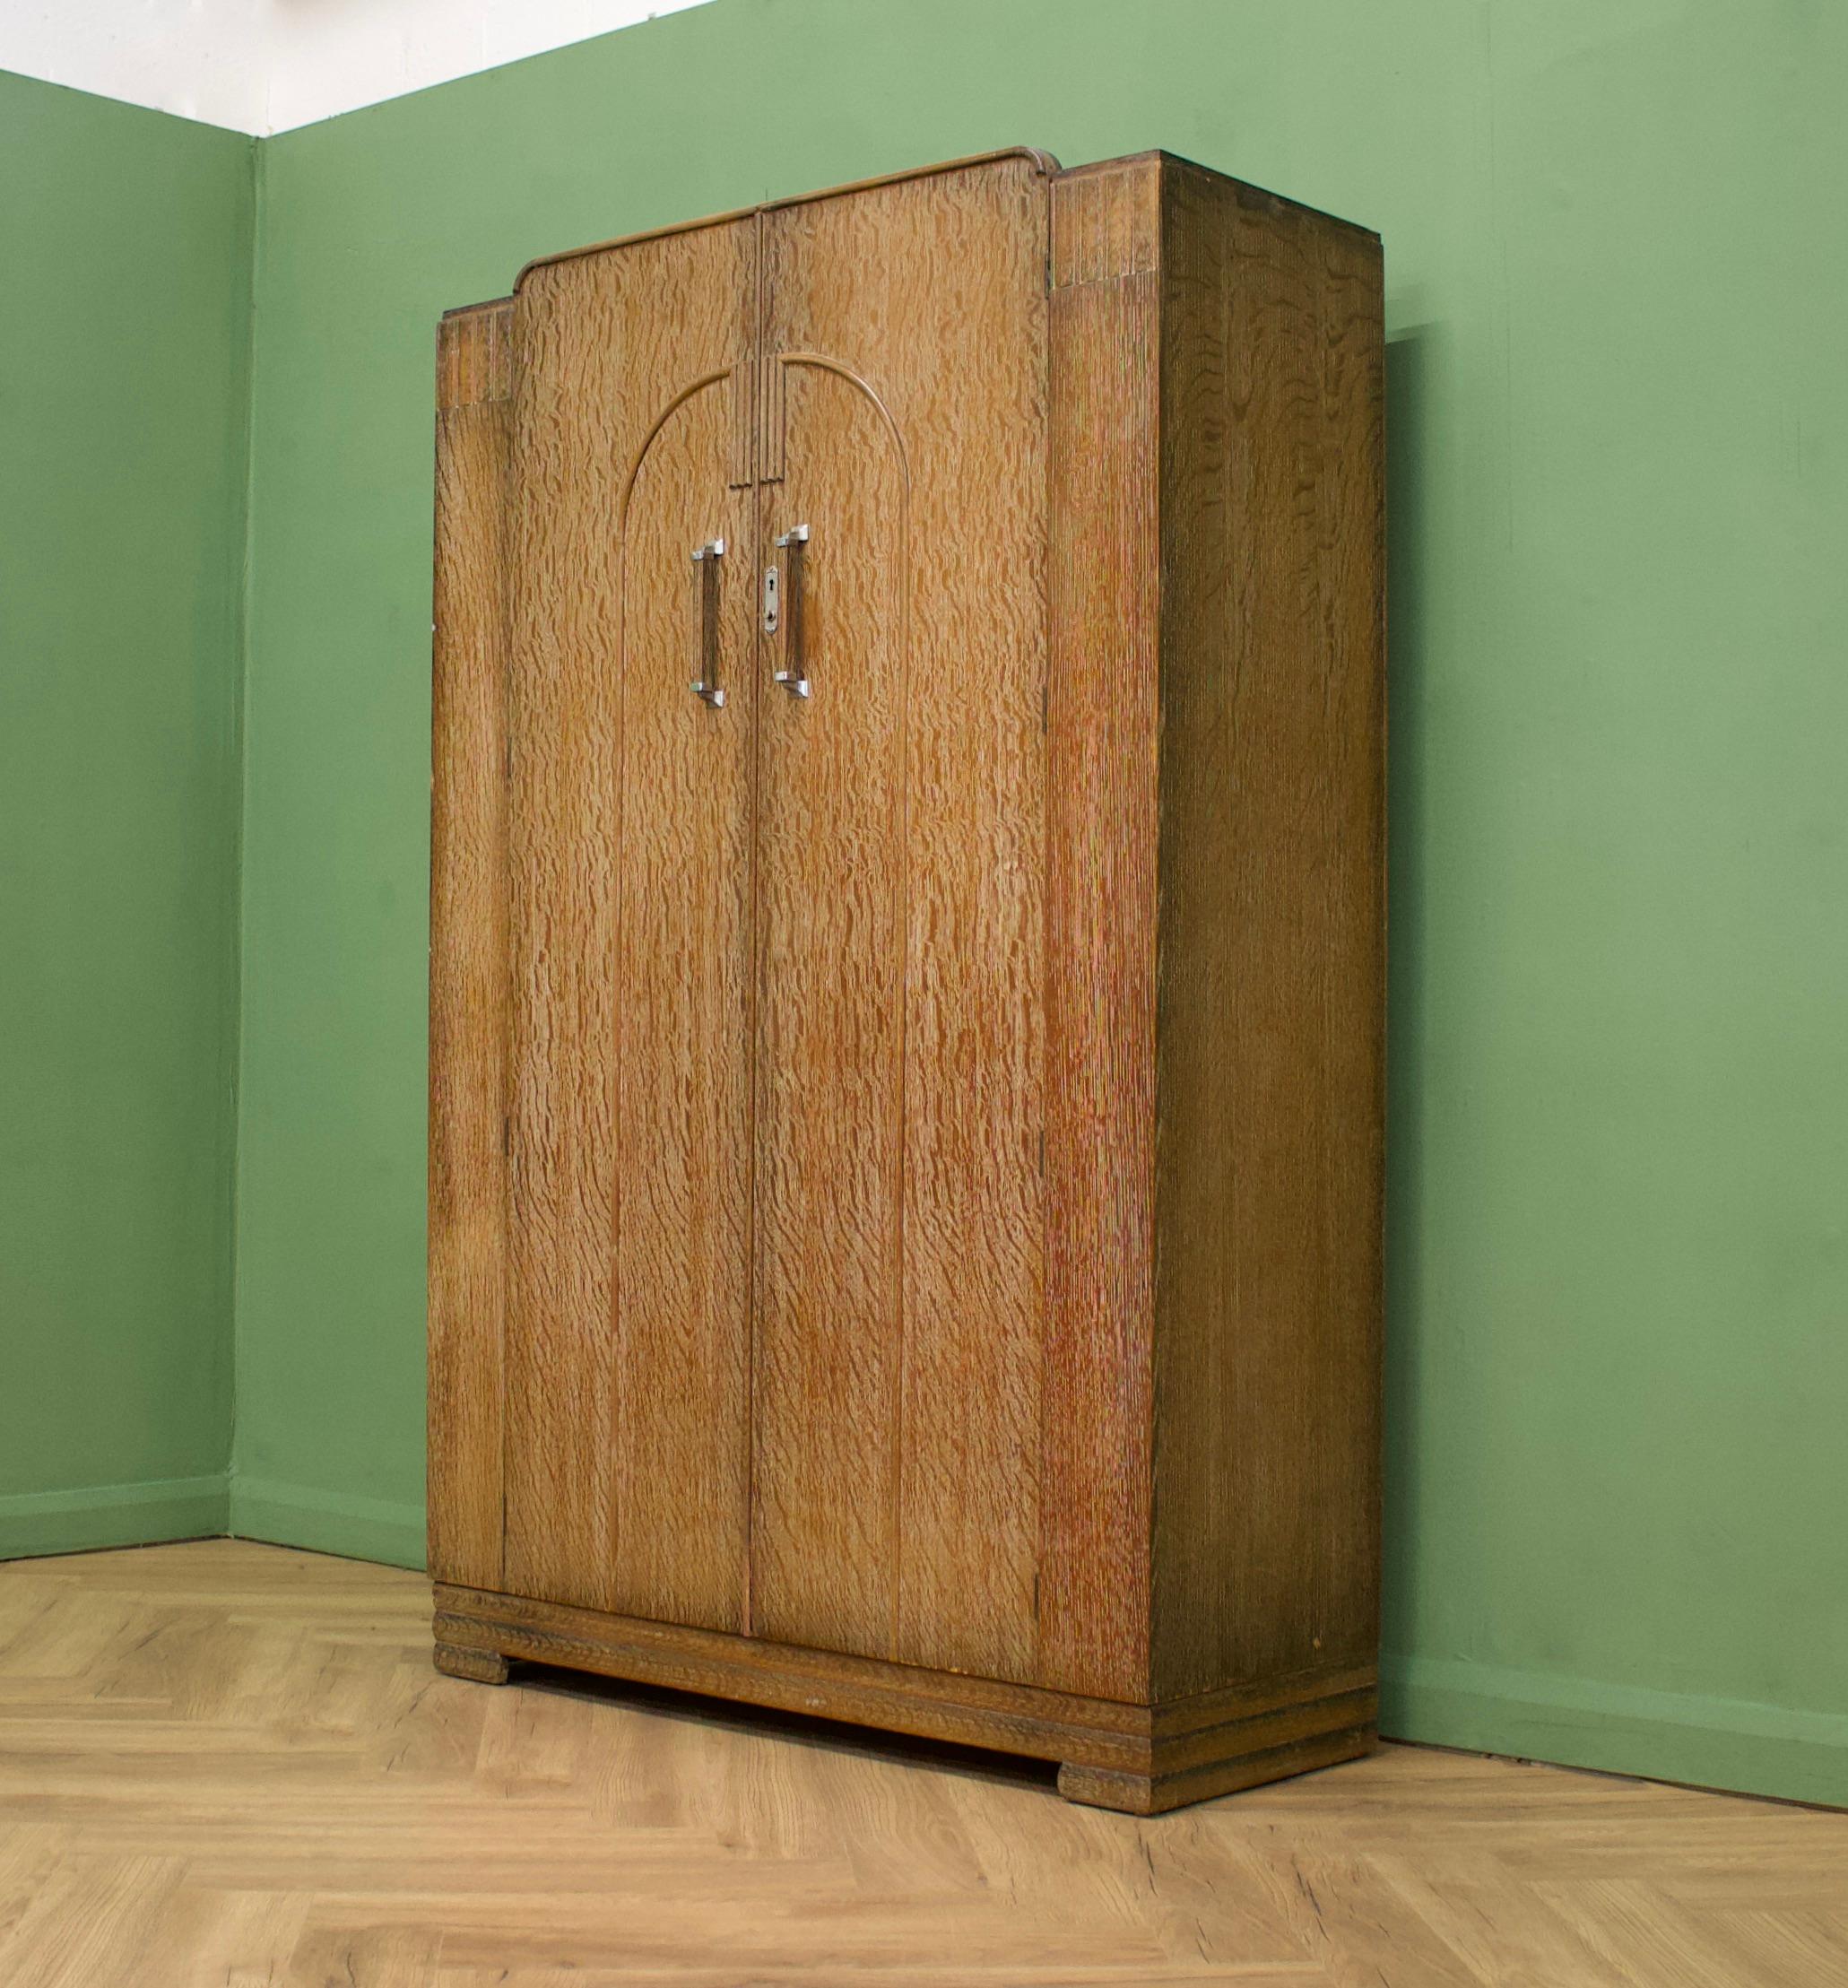 Mid-20th Century British Vintage Art Deco Limed Oak Wardrobe from Maple and Co, 1930s For Sale